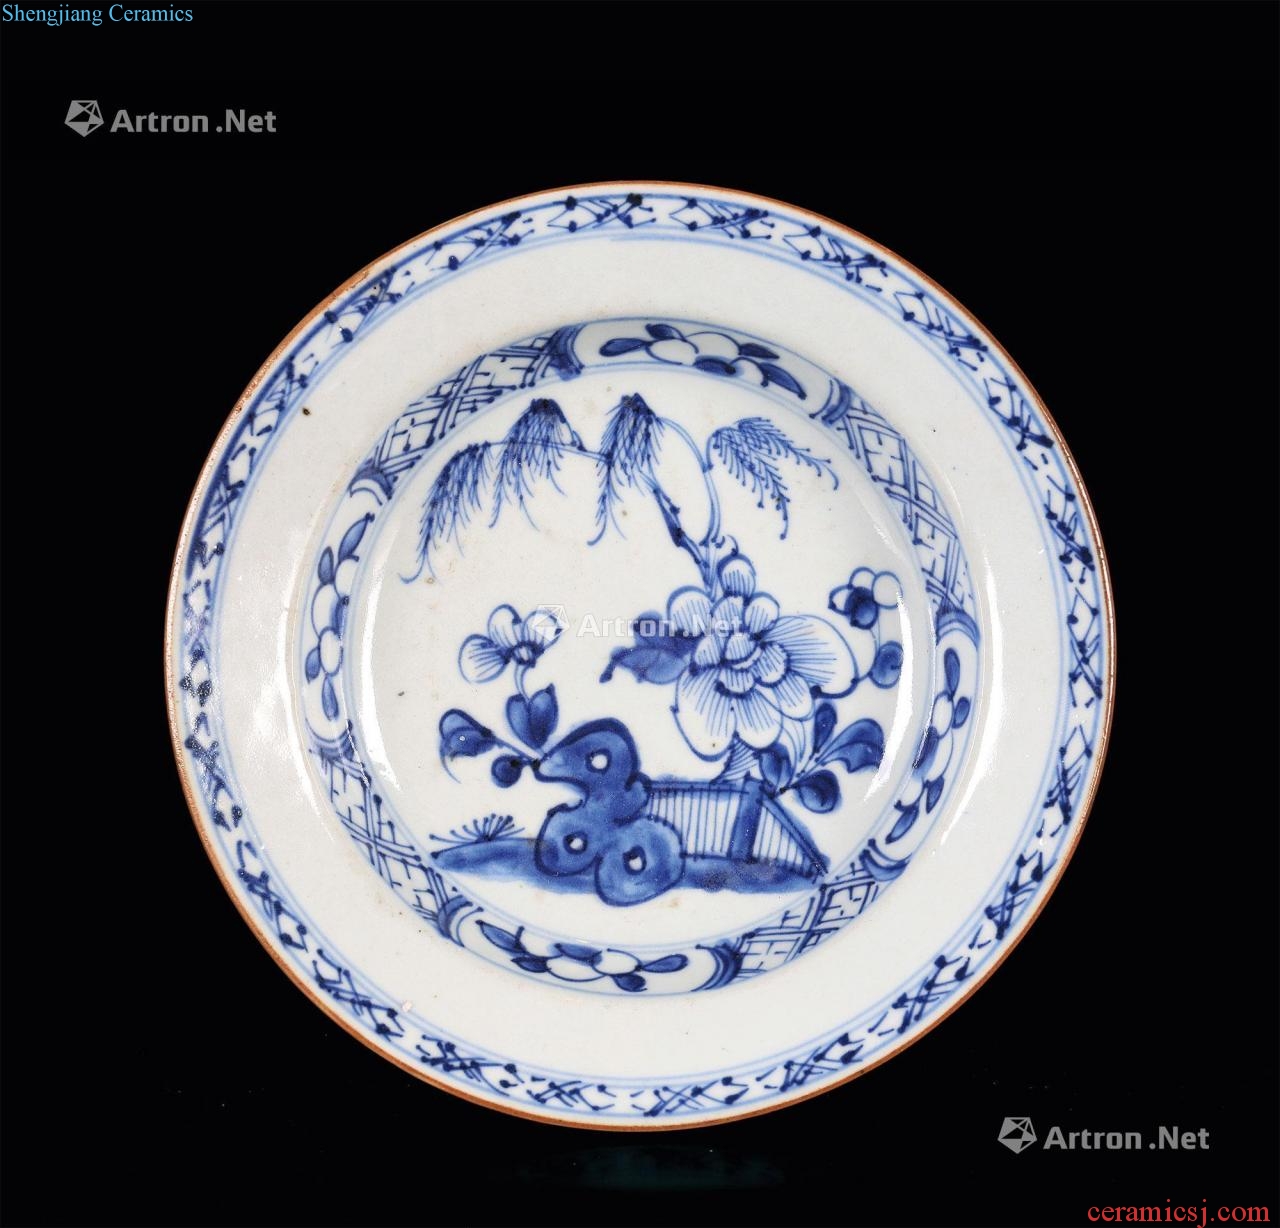 In the qing dynasty Blue and white flower tray